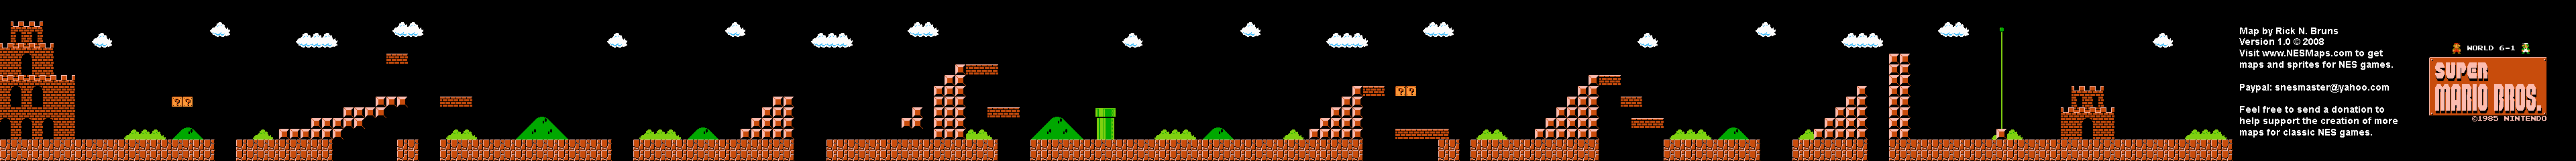 Super Mario Brothers - World 6-1 Nintendo NES Background Only Map